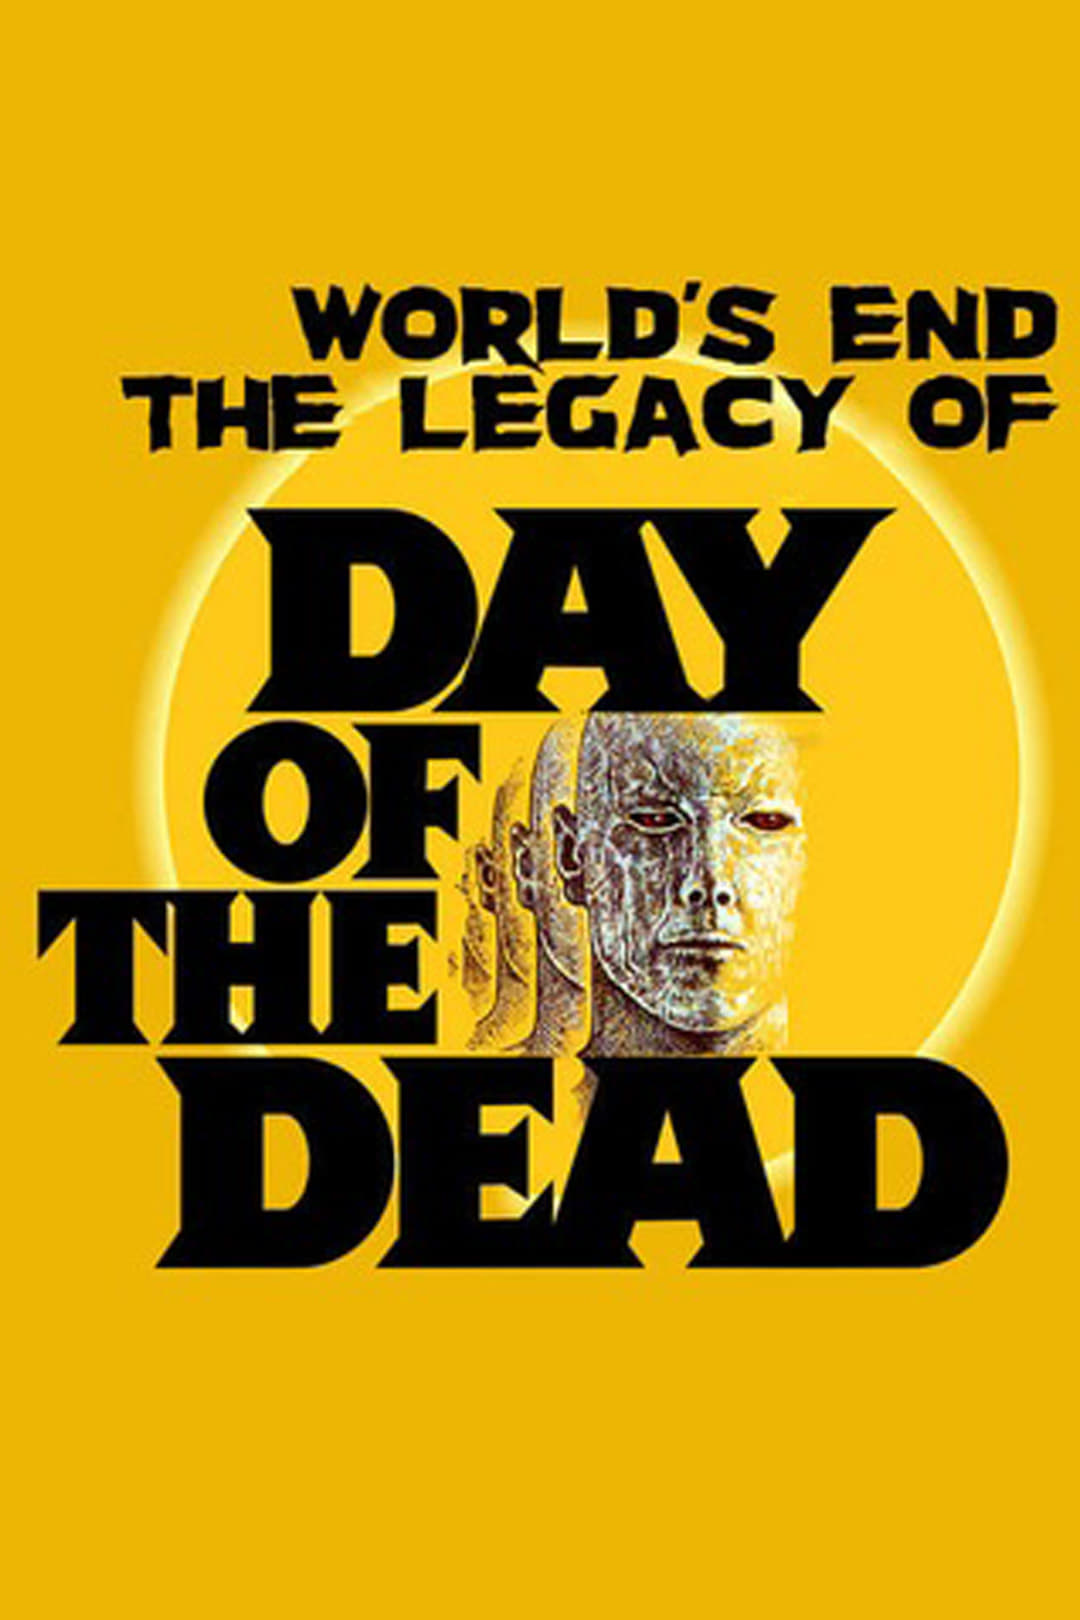 The World’s End: The Legacy of 'Day of the Dead'